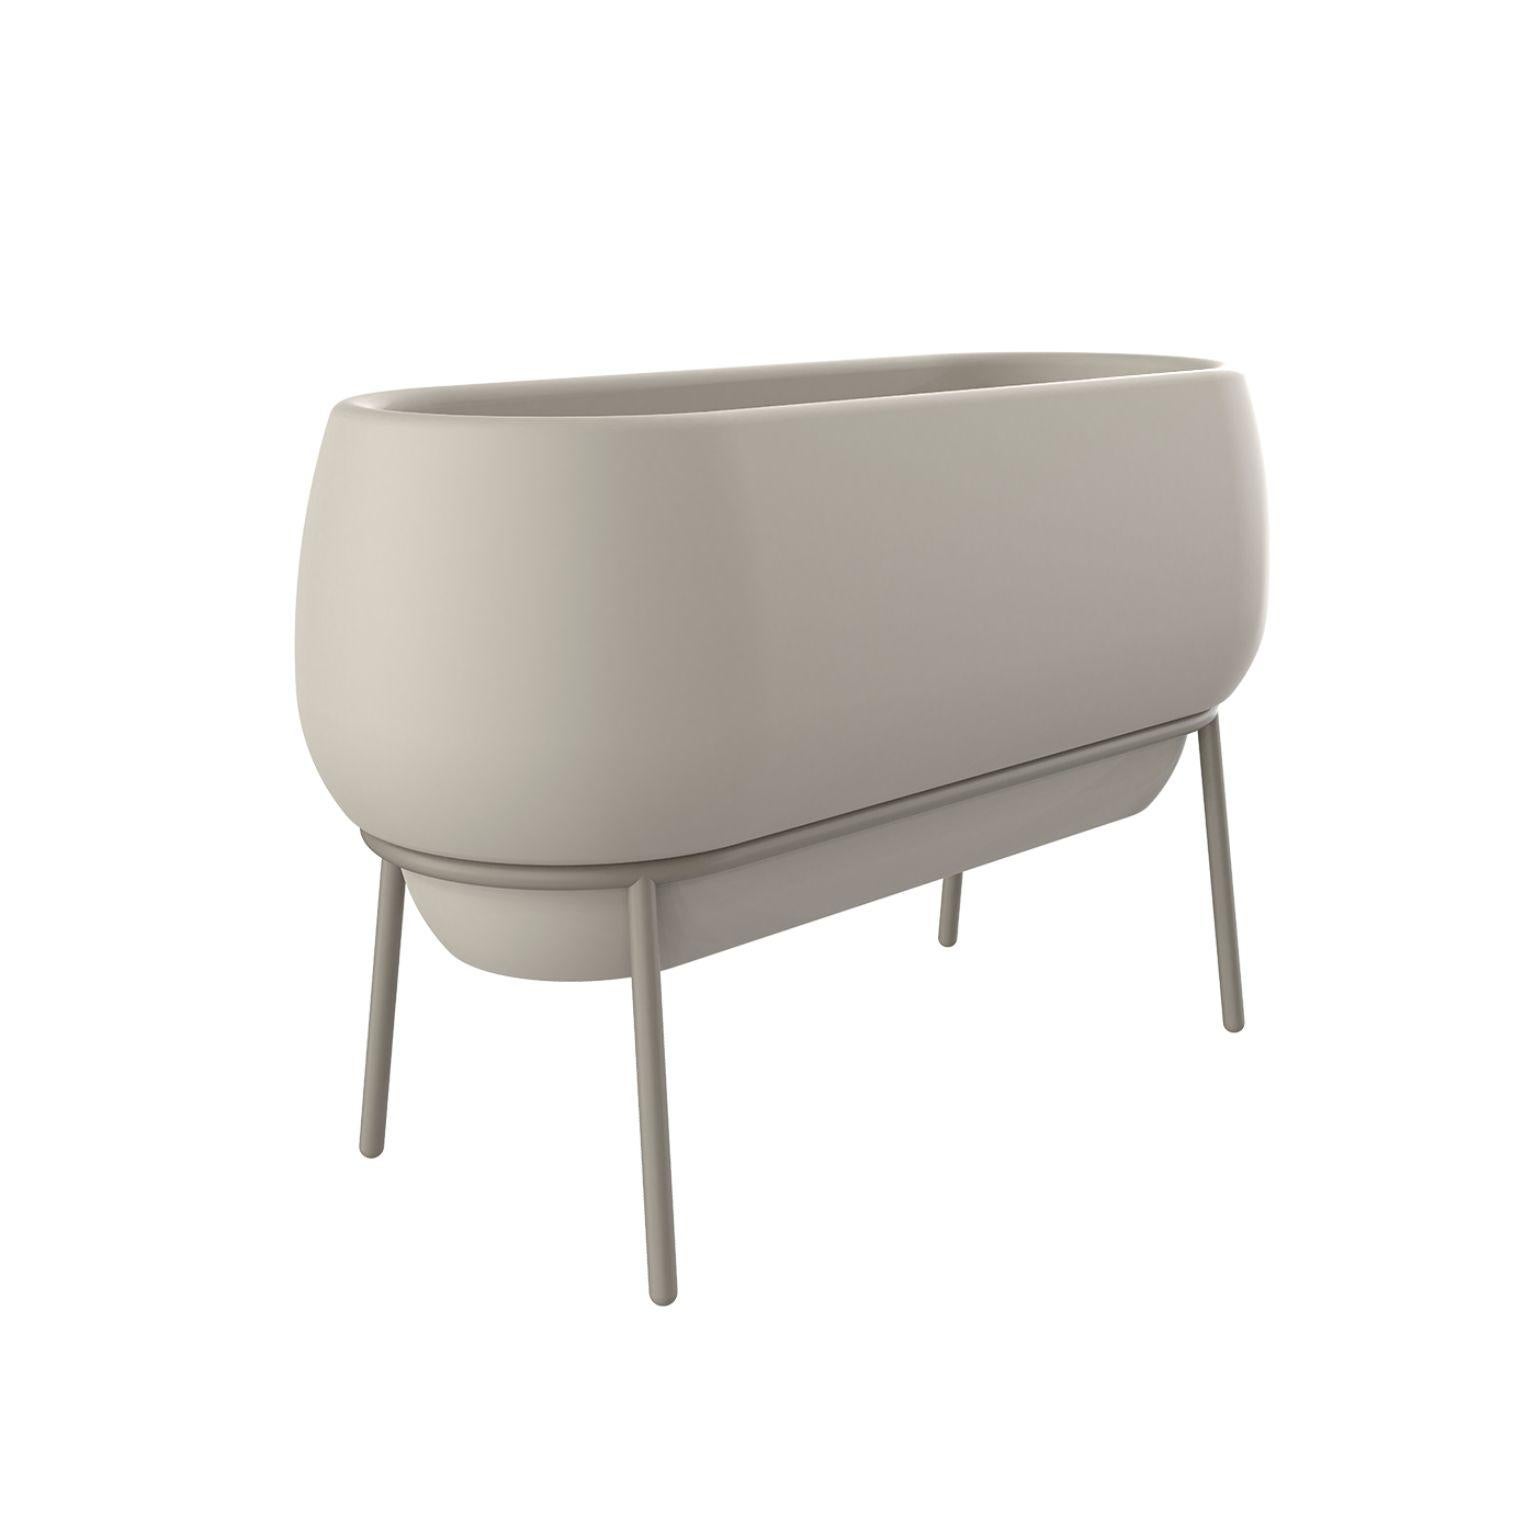 Lace cream planter by Mowee
Dimensions: D50 x W120 x H76 cm
Material: Polyethylene and stainless steel.
Weight: 13.5 kg.
Also available in different colours and finishes. (Lacquered or retroilluminated).

Lace is a collection of furniture made